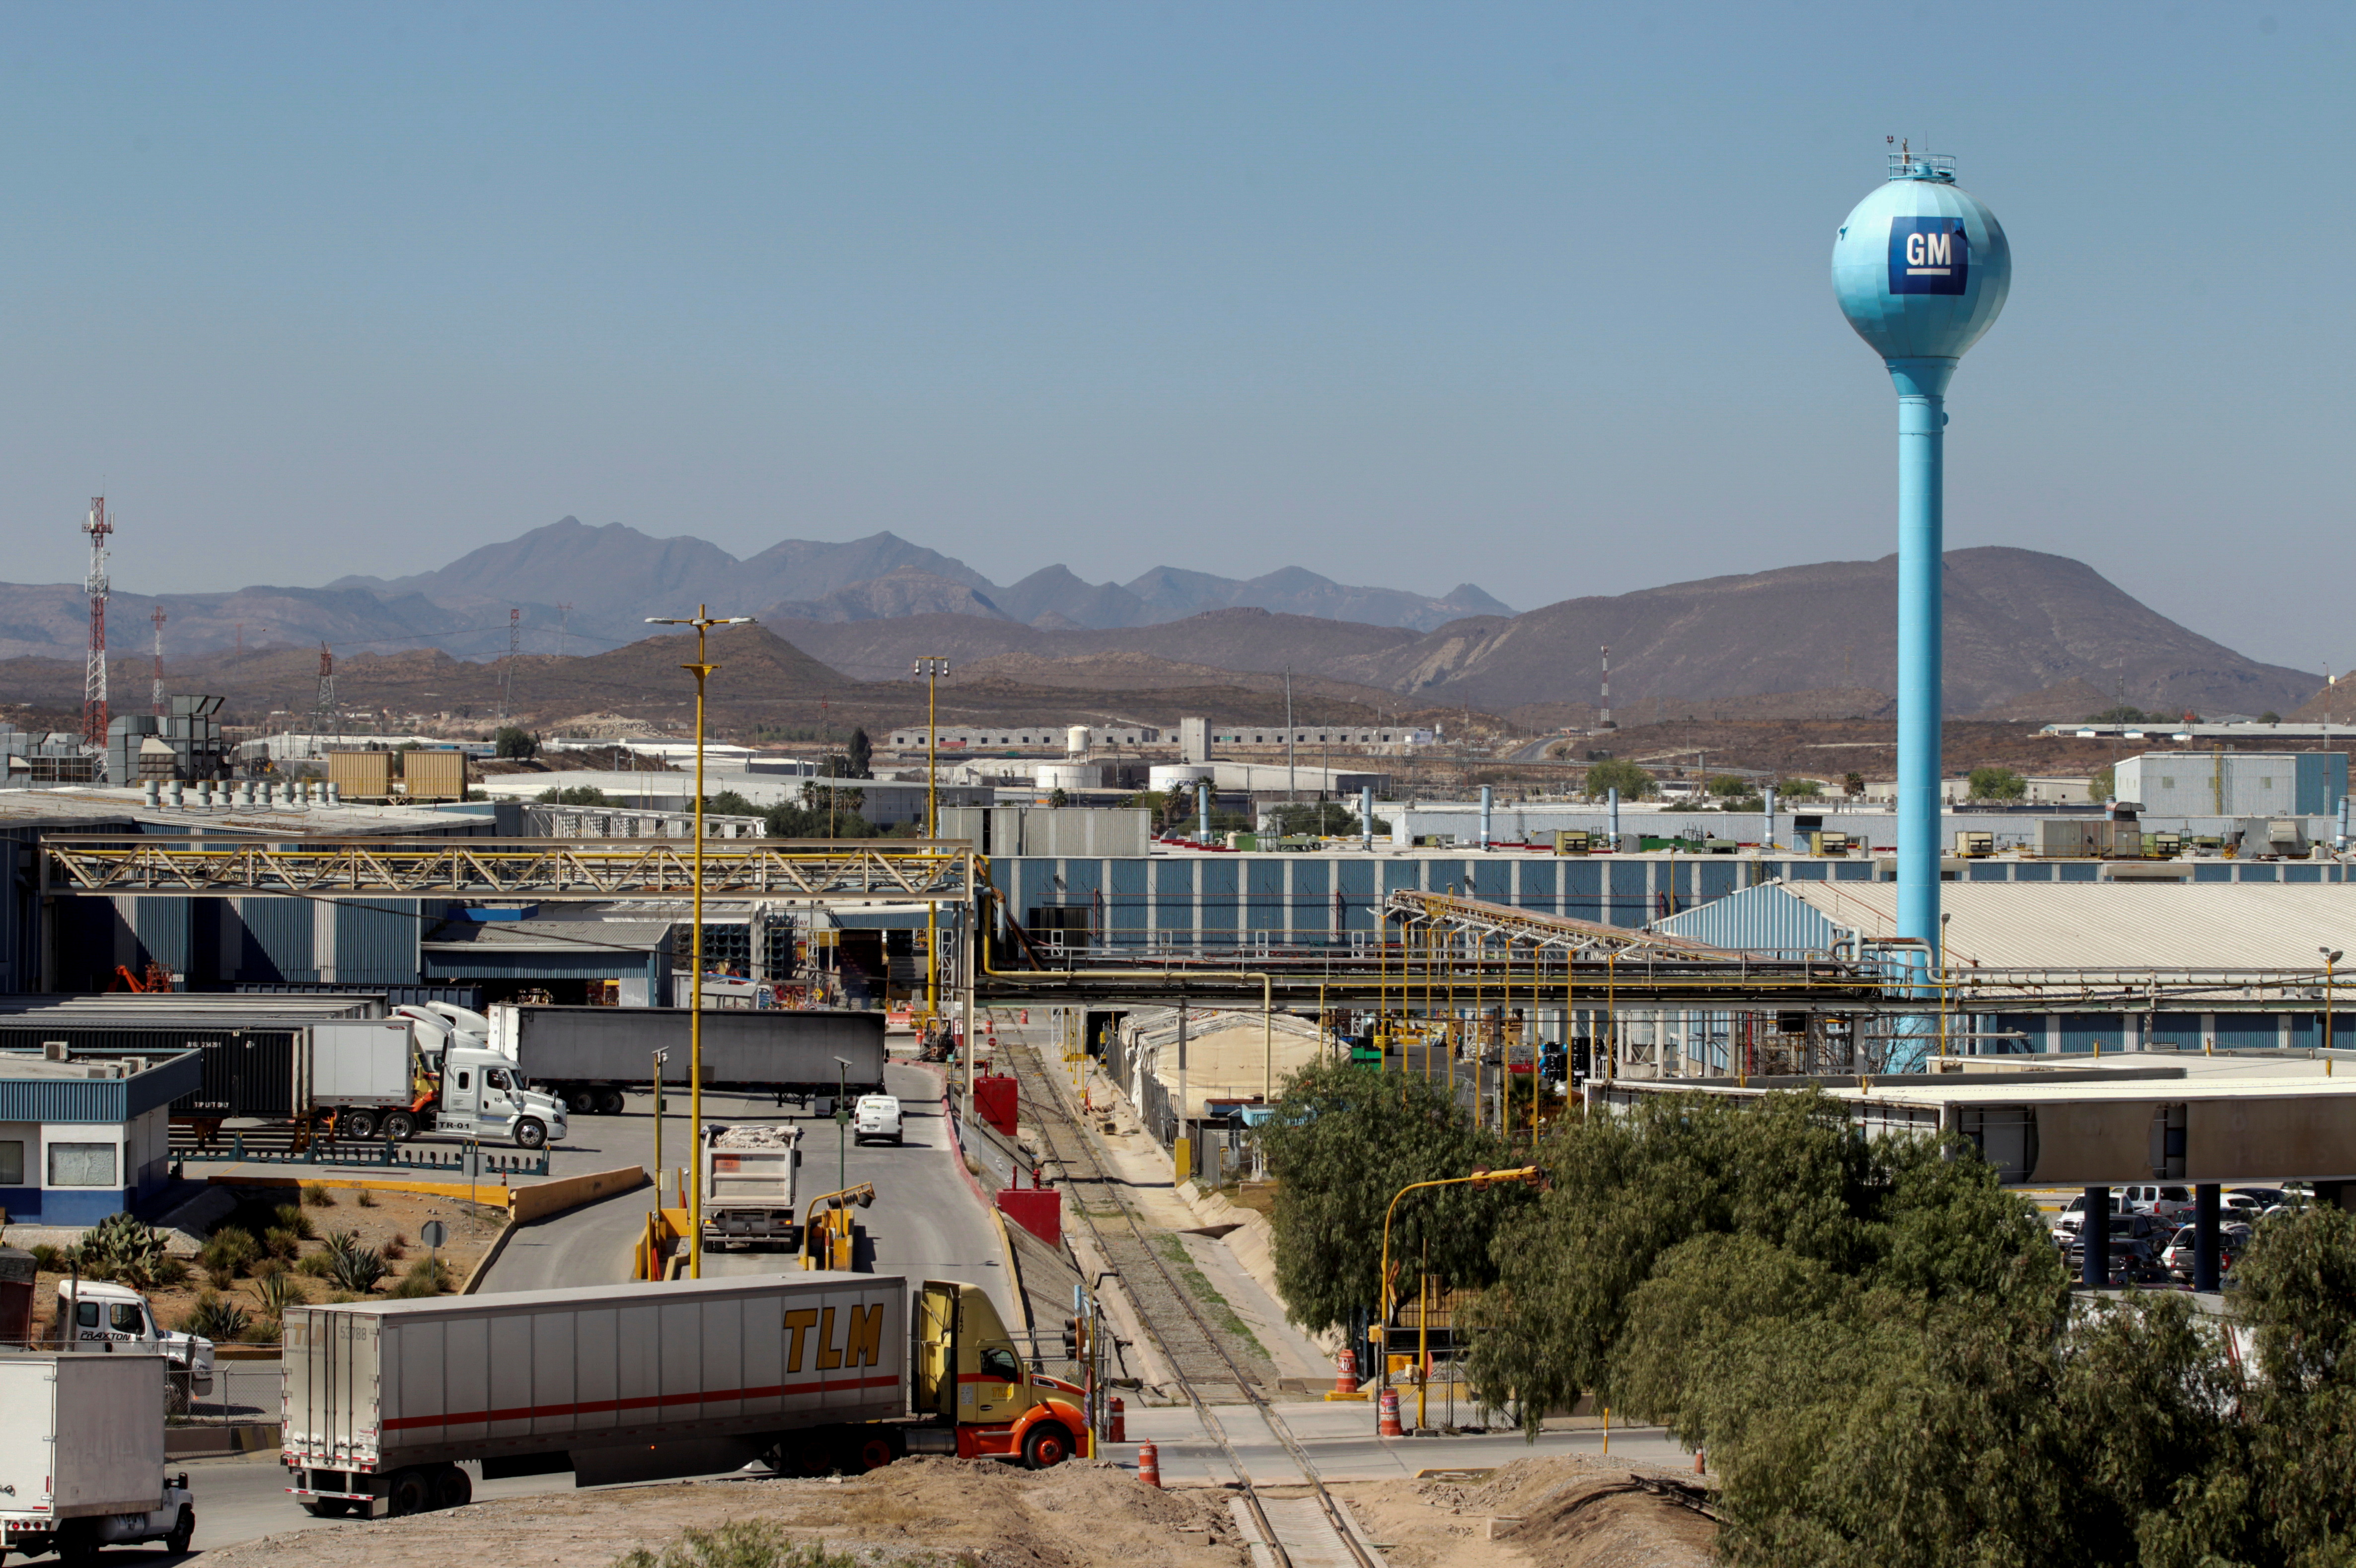 A general view shows the General Motors assembly plant in Ramos Arizpe